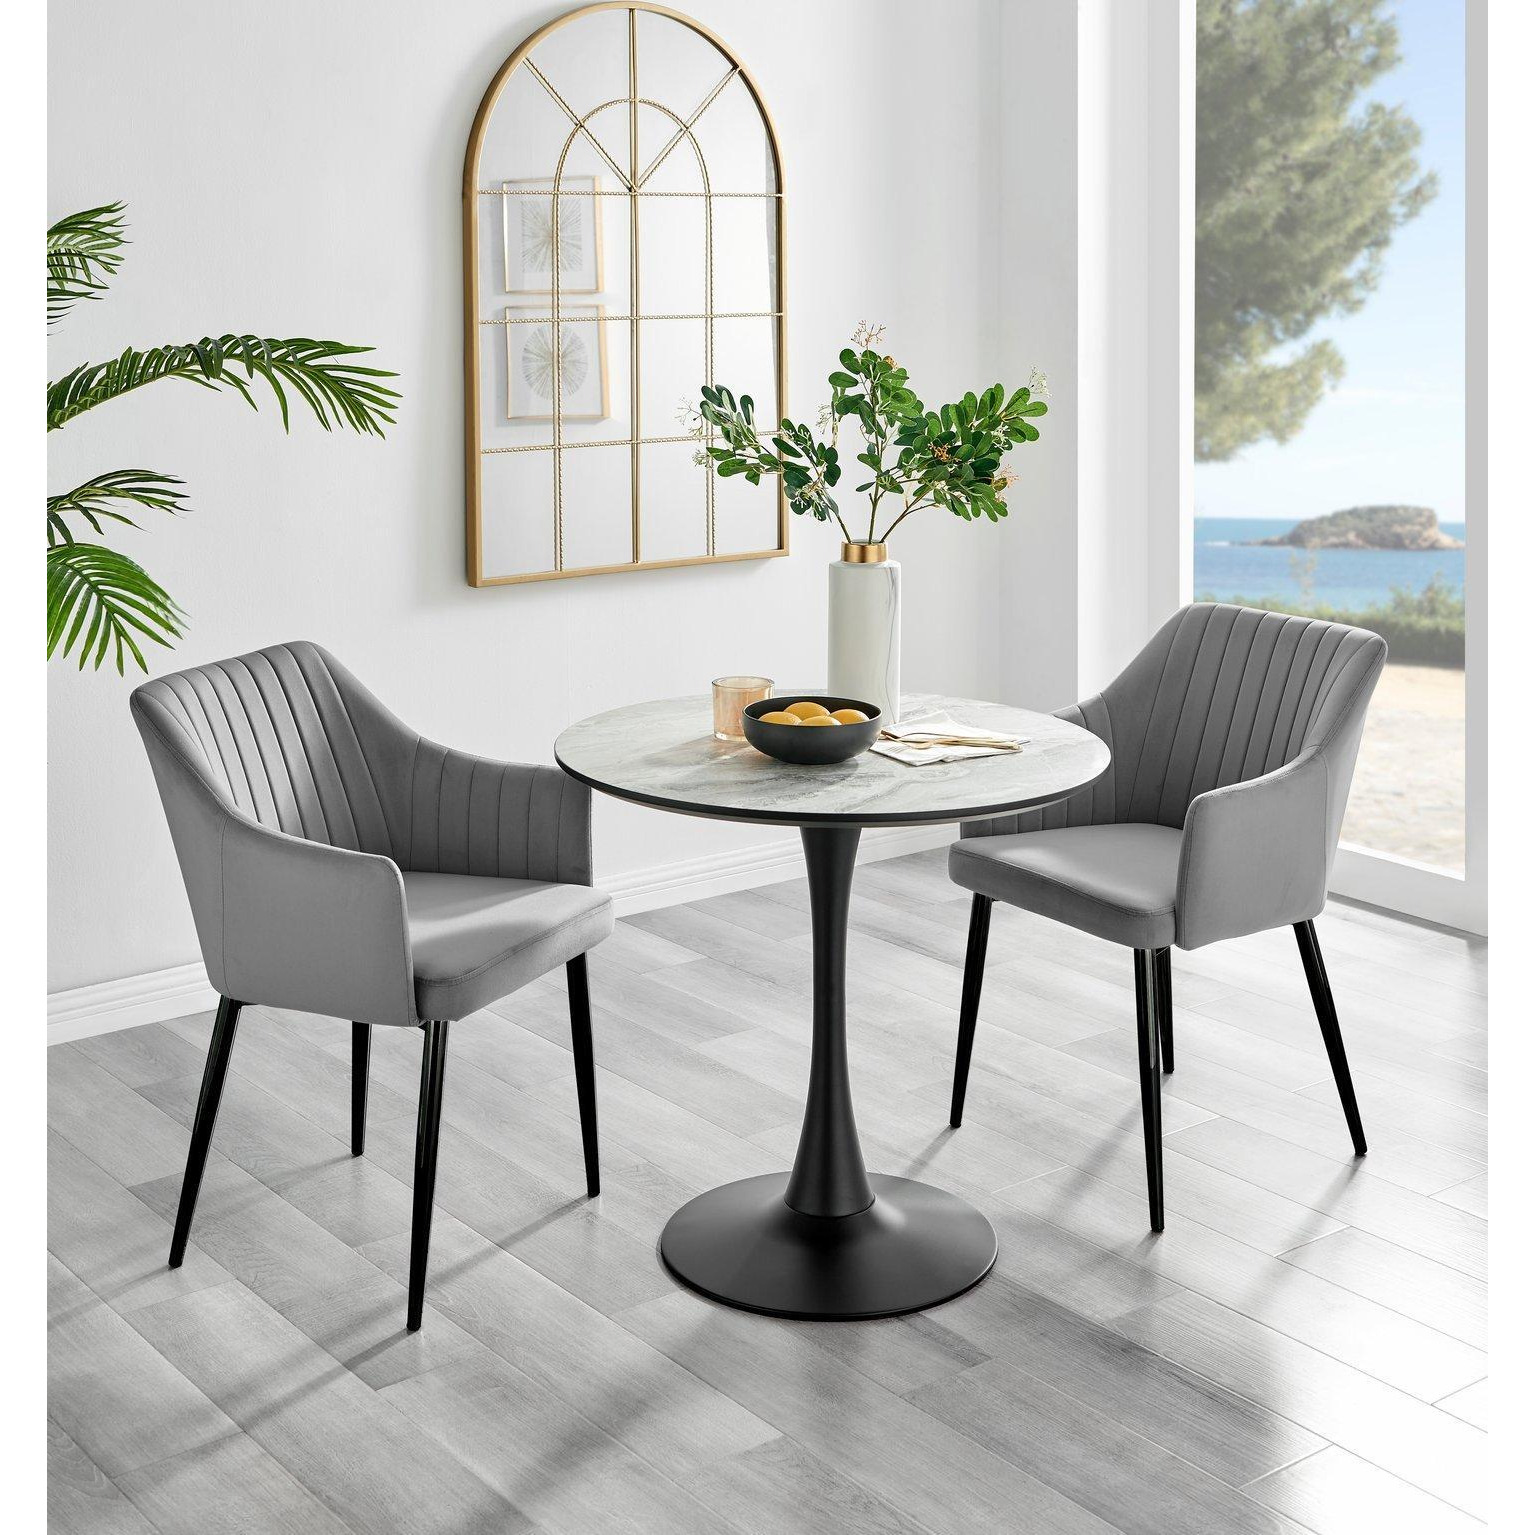 Elina White Marble Effect Scratch Resistant Dining Table & 2 Calla Velvet Black Leg Chairs - image 1